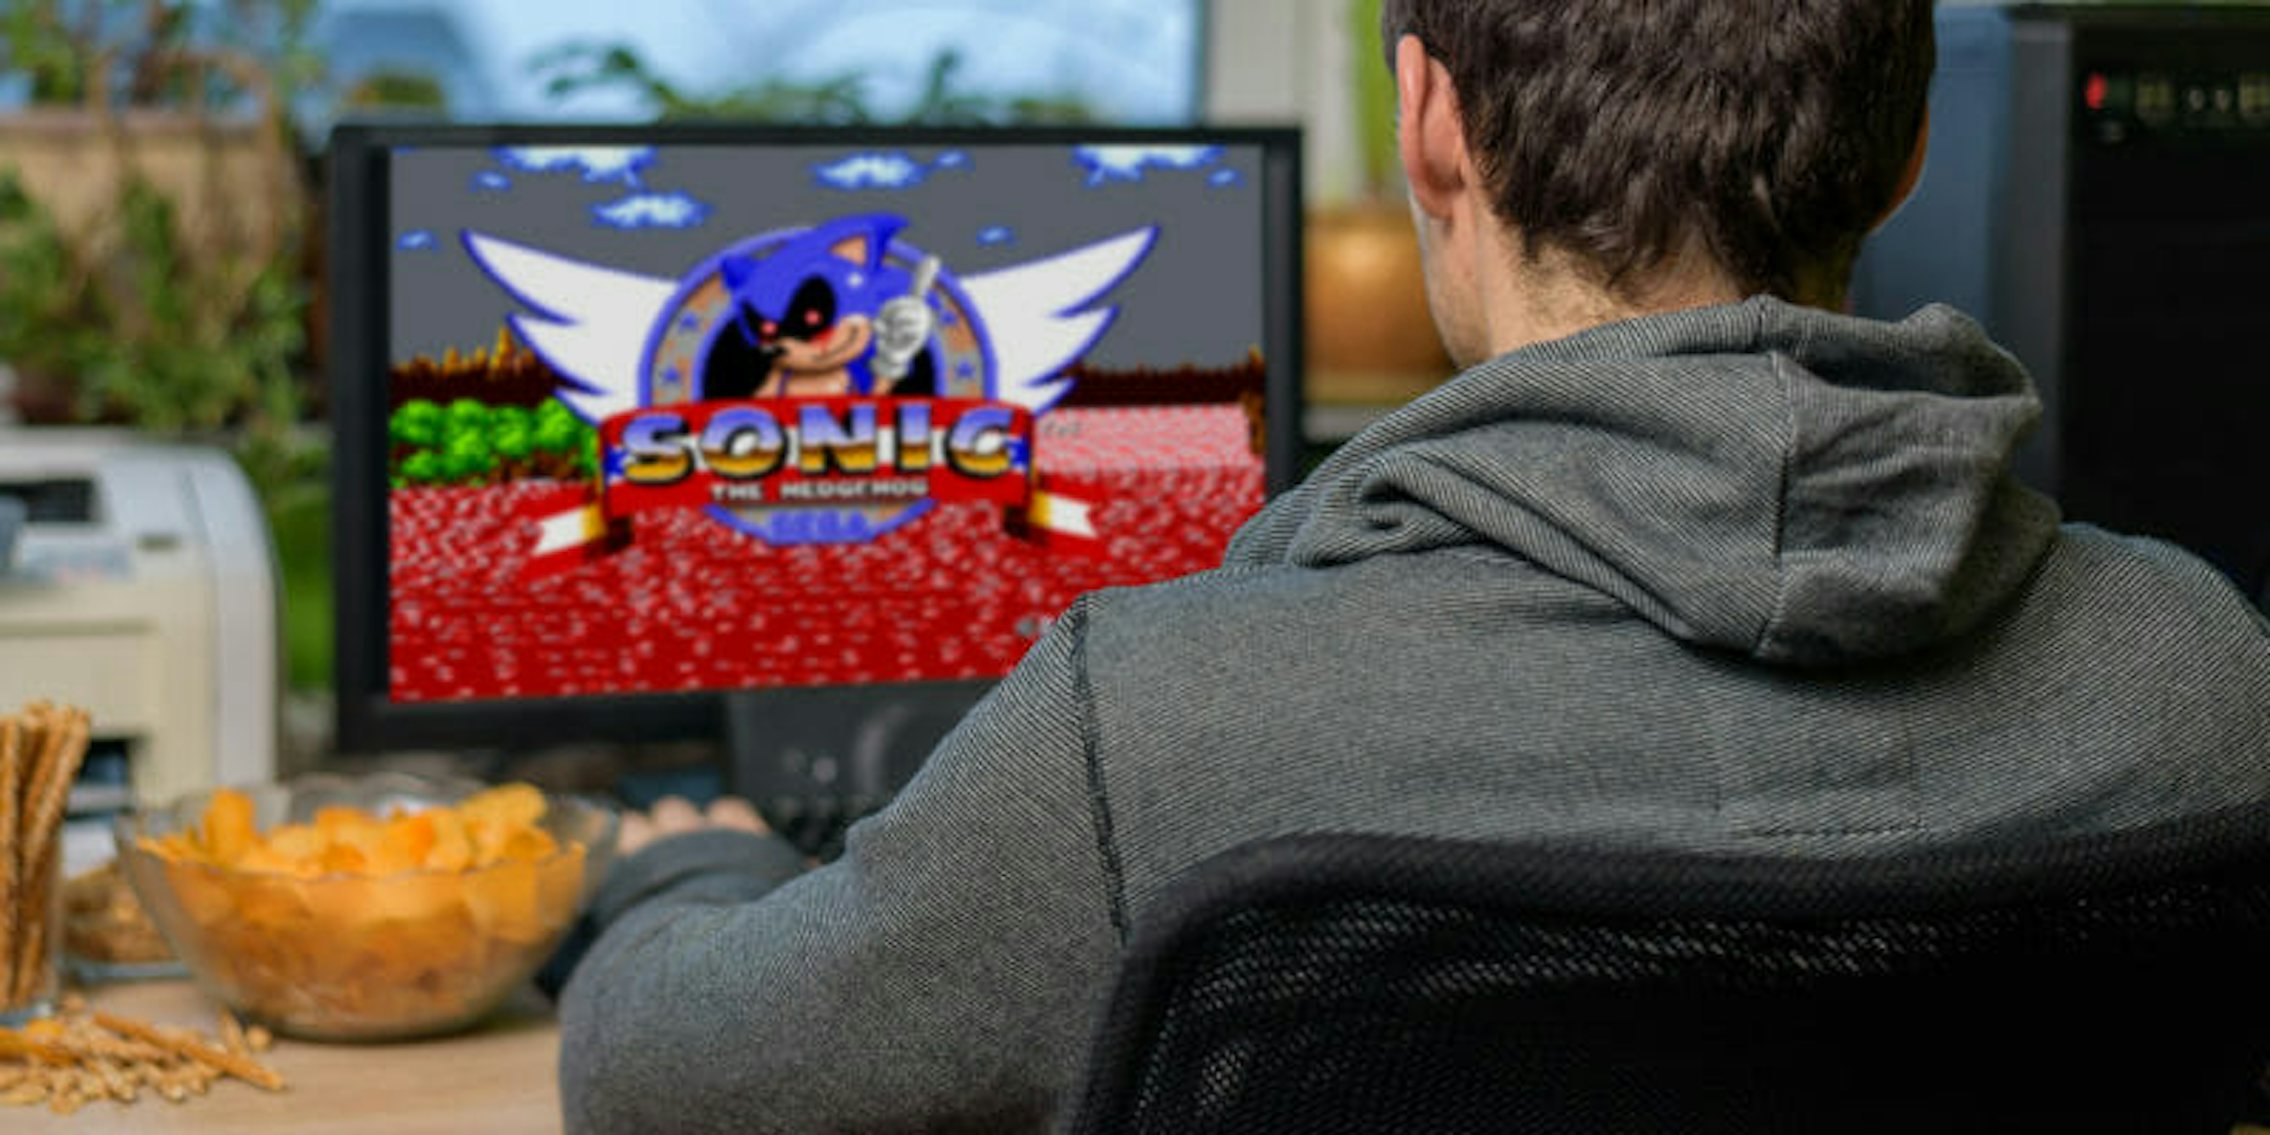 Just got this weird sonic.exe game commercial using the sonic